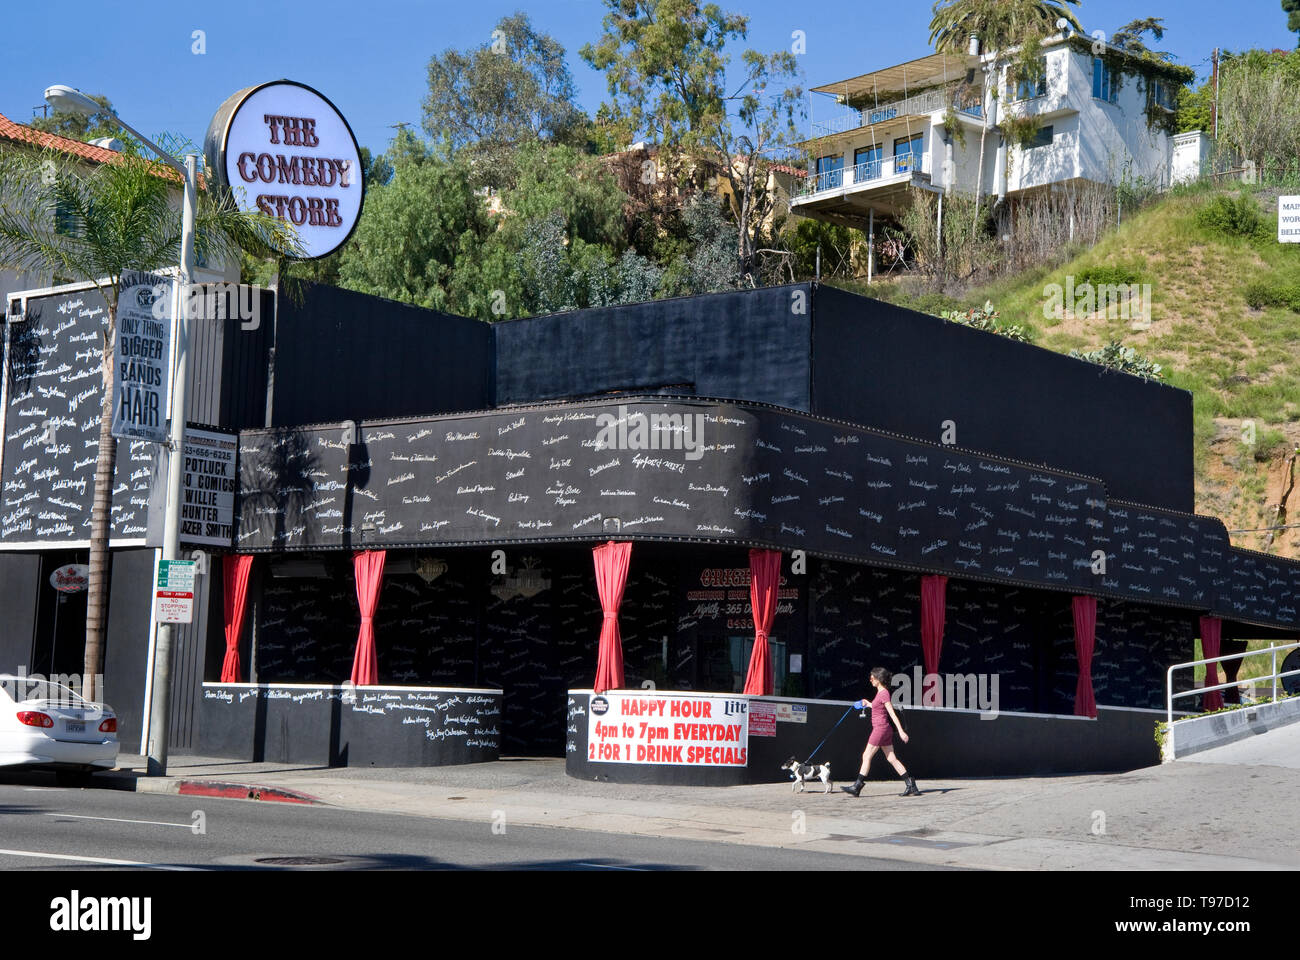 The Comedy Store on the Sunset Strip in Los Angeles, CA, USA Stock Photo